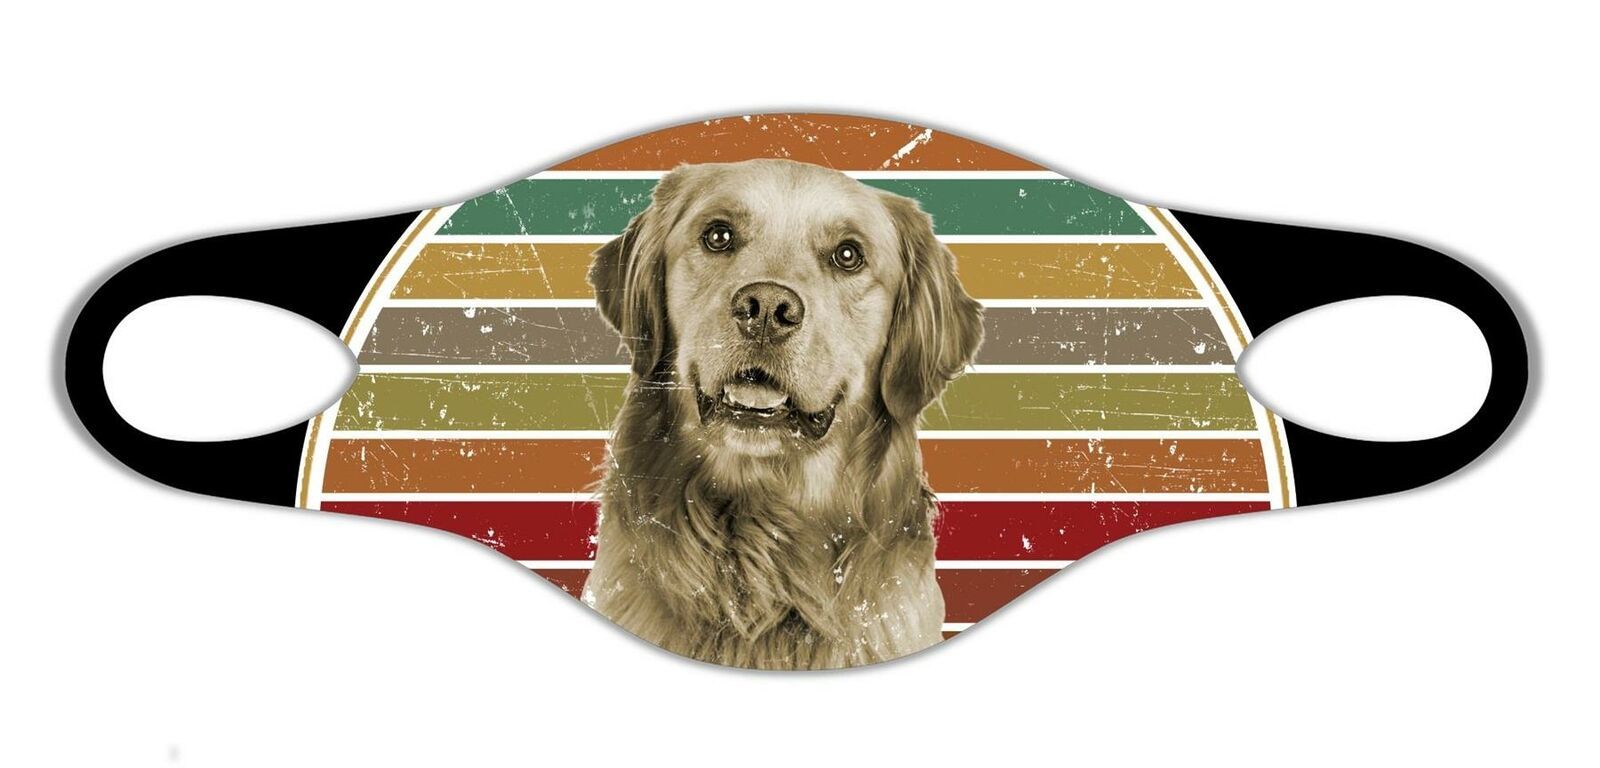 Golden Retriever dog lovers Soft face protective mask easily washed respire airy